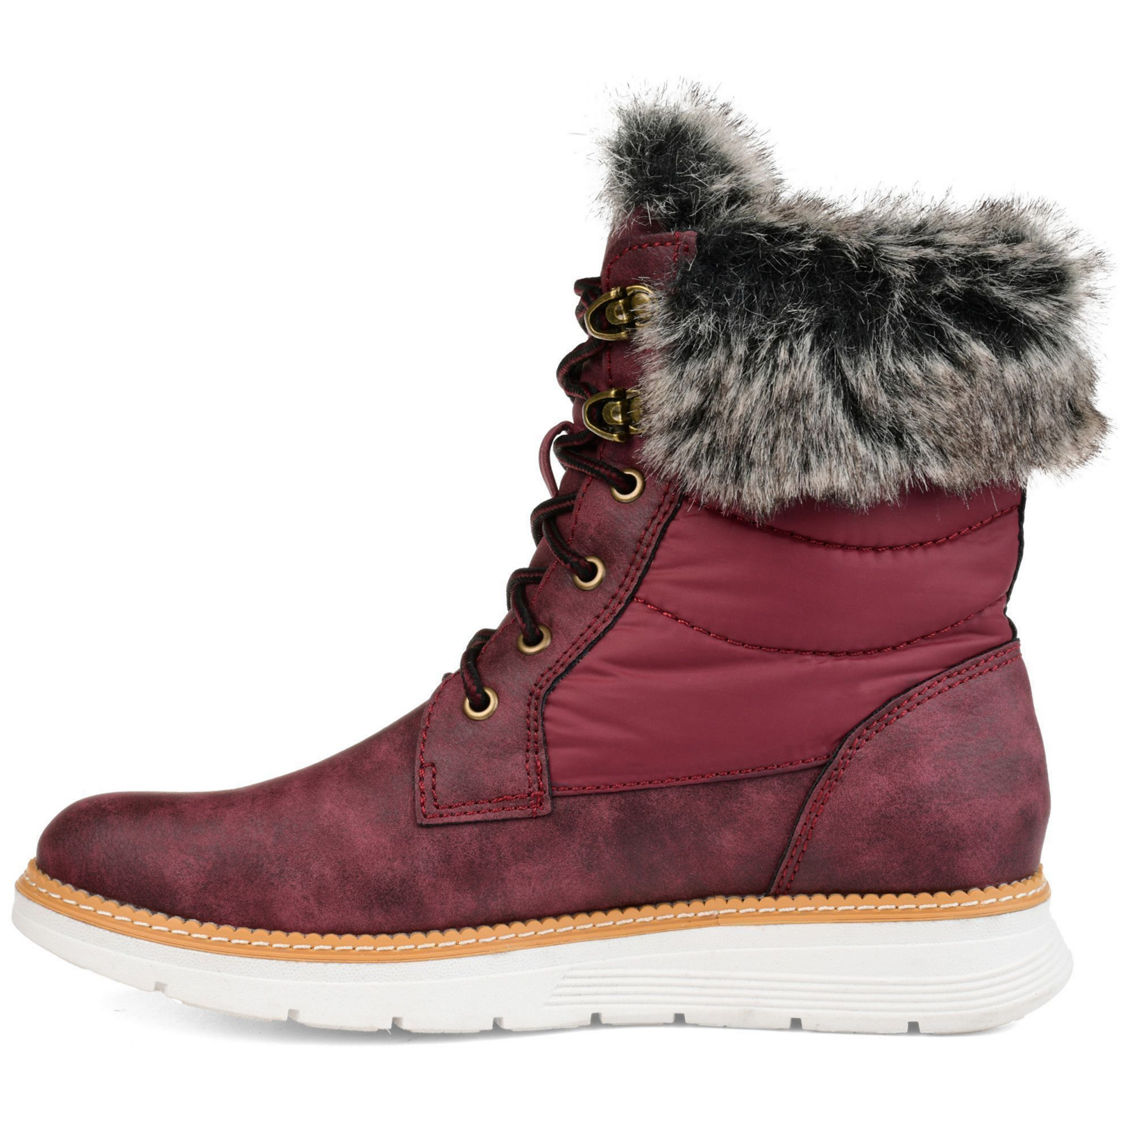 Journee Collection Women's Flurry Winter Boot | Boots | Shoes | Shop ...